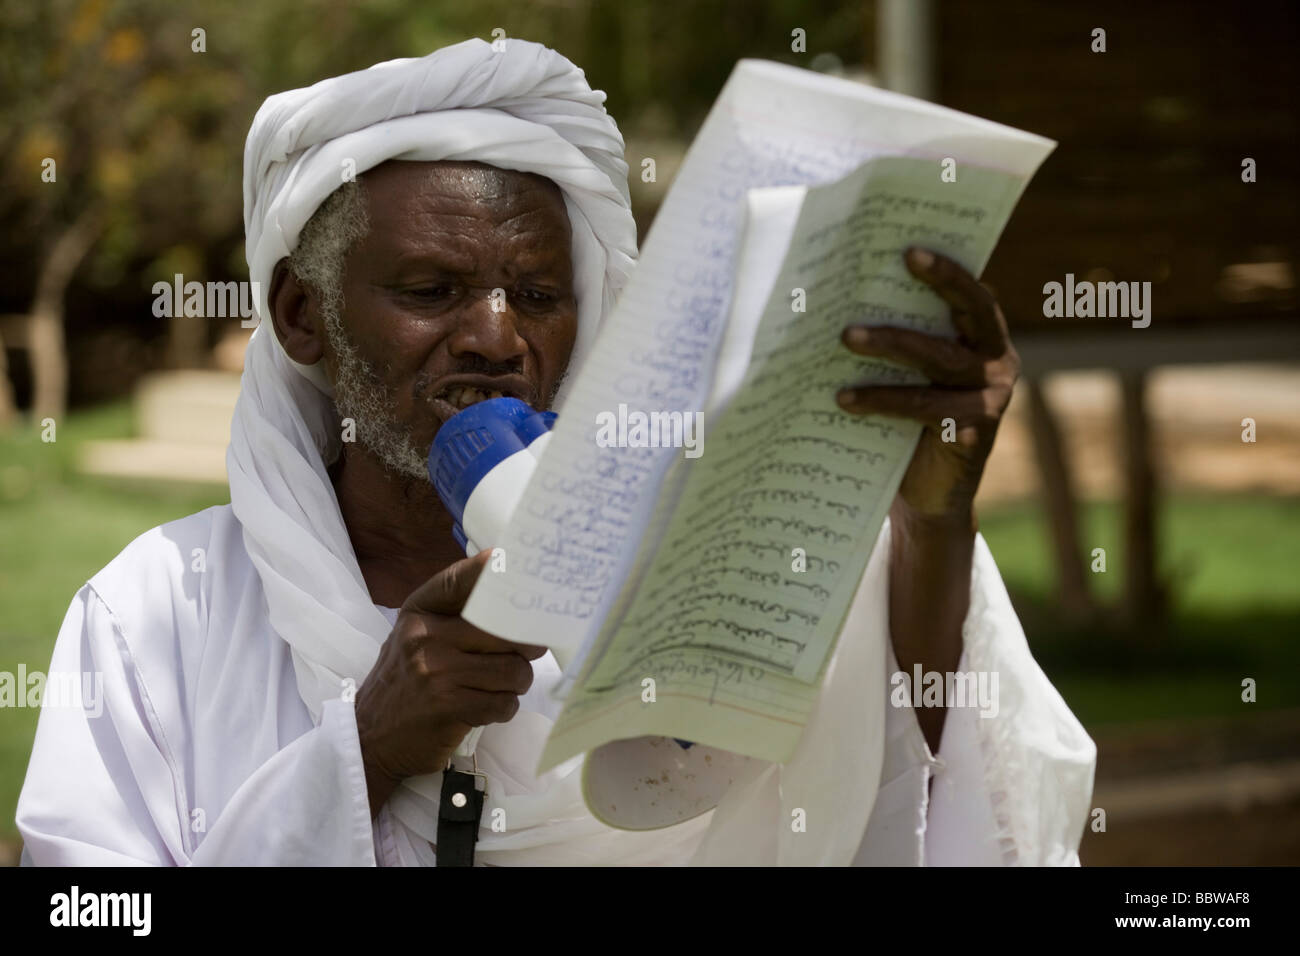 A traditional story-teller delivers tales from Islamic texts compound belonging to Governor of North Darfur in Al-Fasher Stock Photo